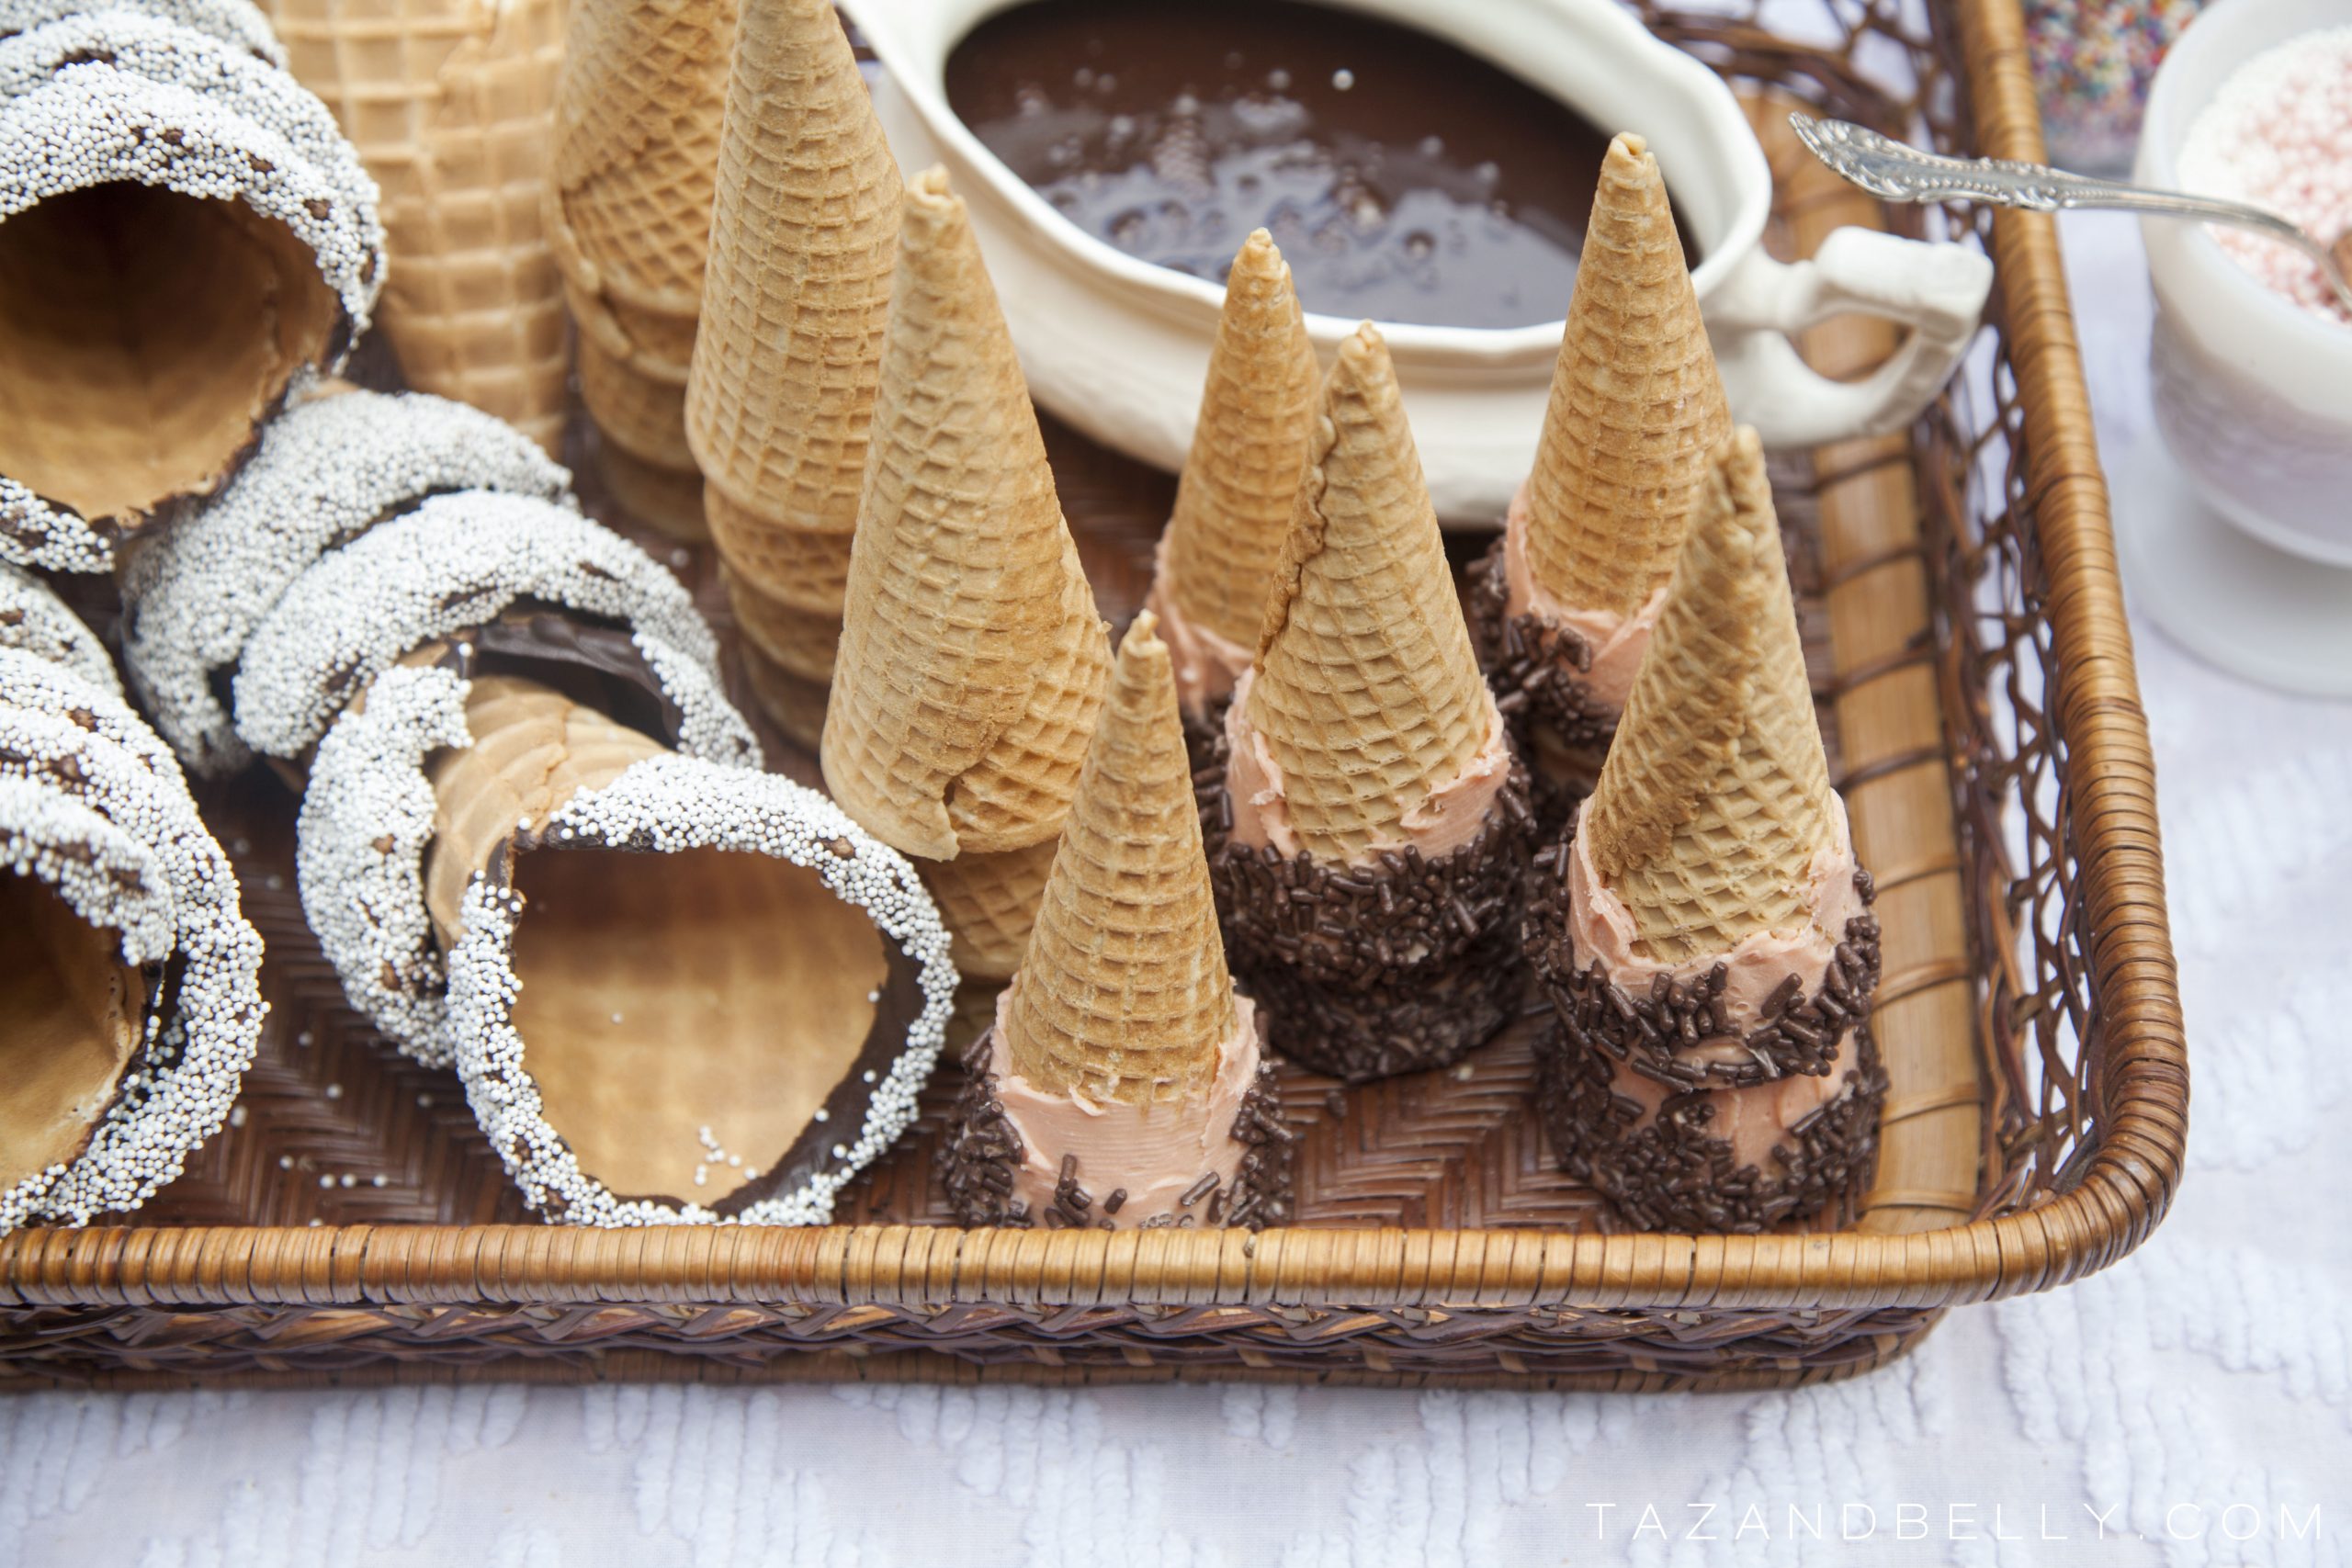 Make National Ice Cream Day special with fancy waffle and sugar cones!